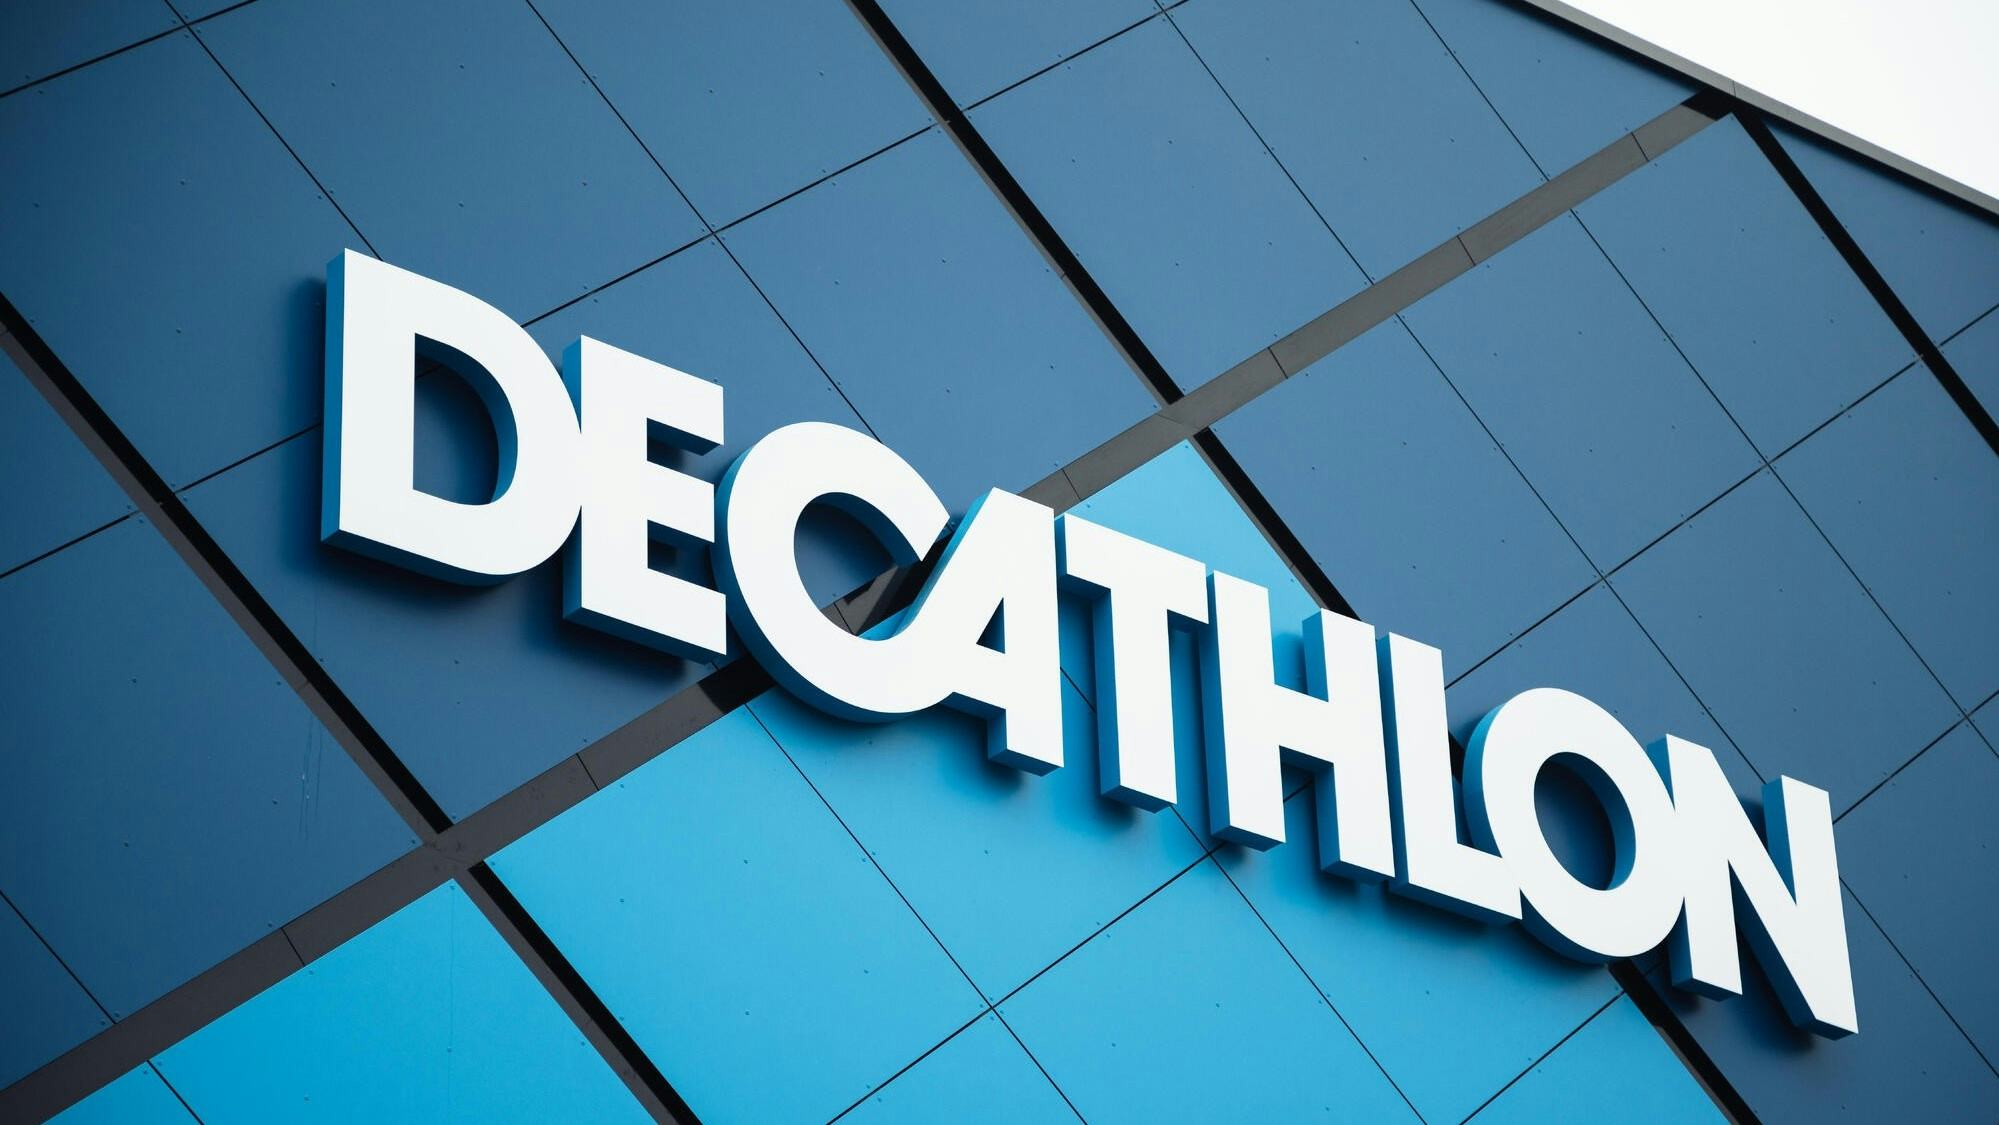 Mobility (which includes all bike products), is one of the 4 leading segments of Decathlon Germany. – Photo Decathlon